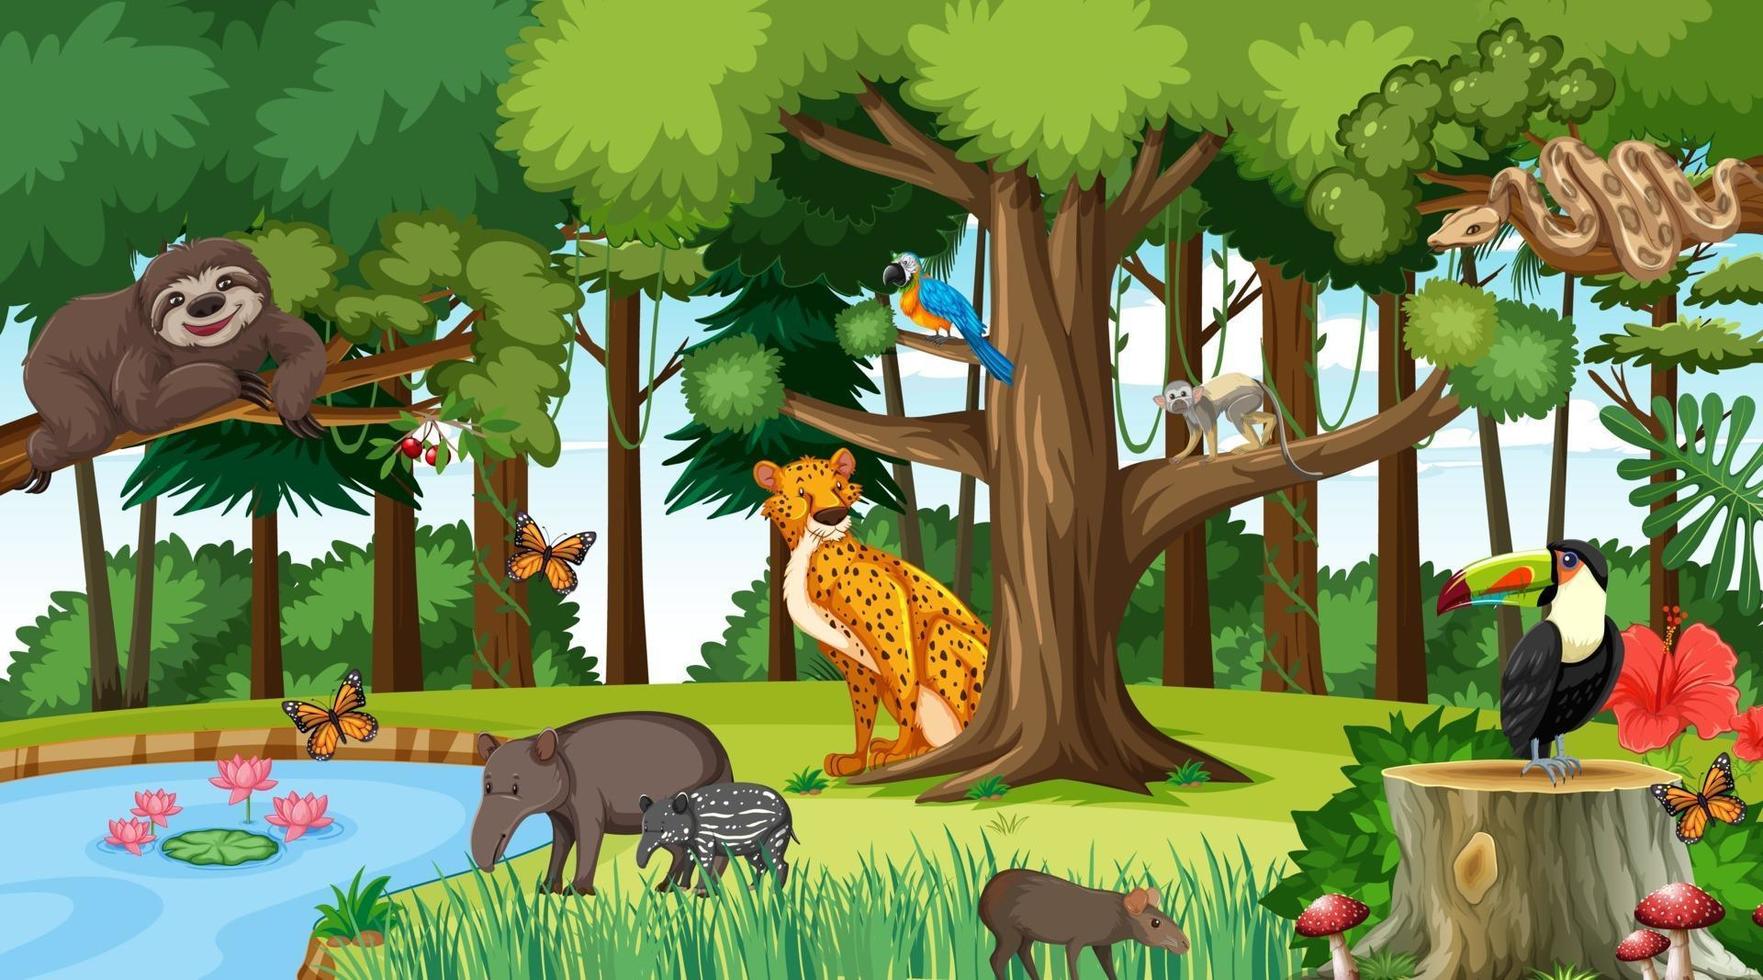 Forest at daytime scene with different wild animals vector